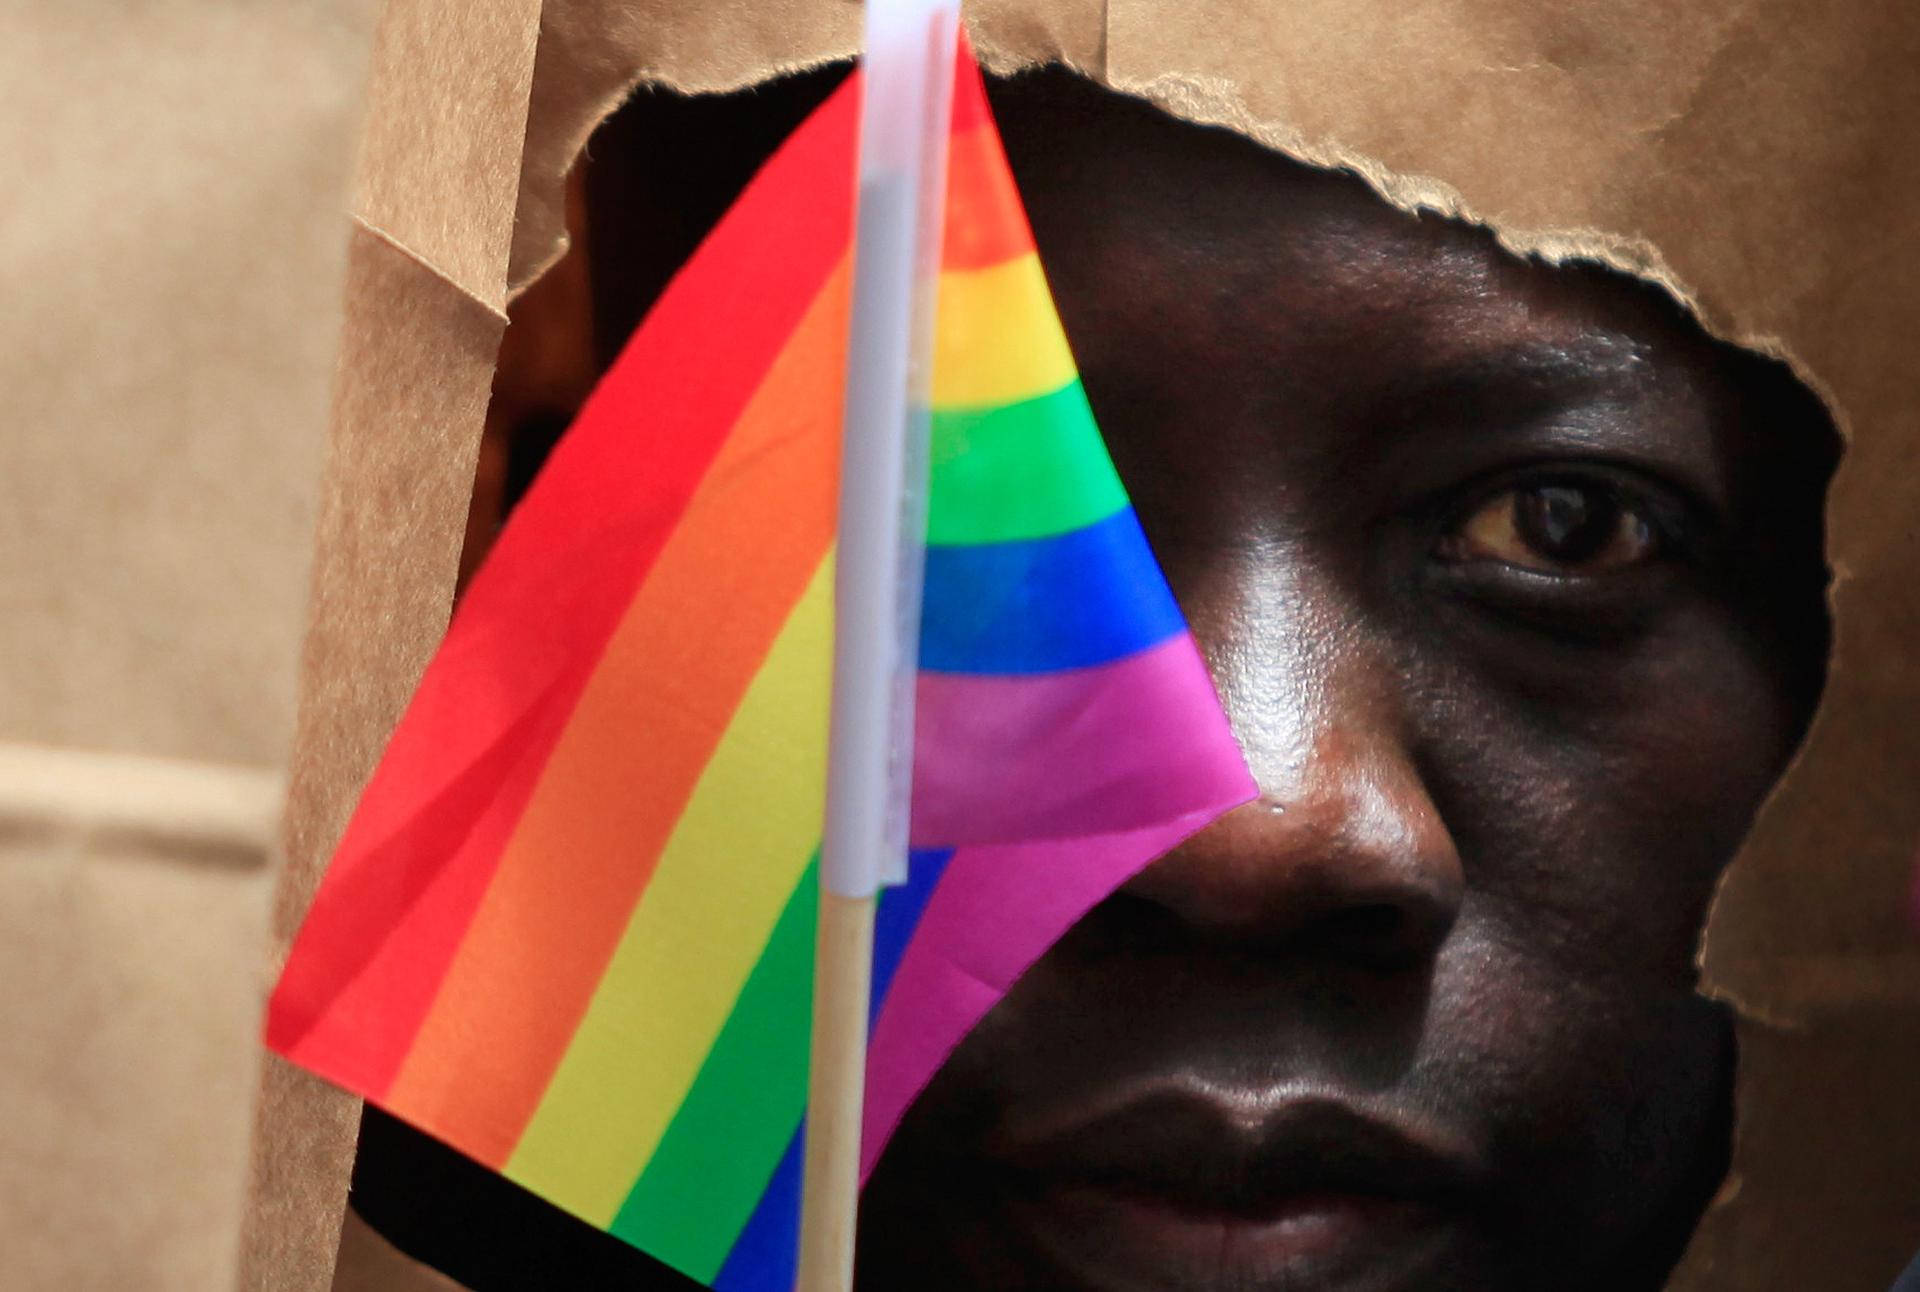 An asylum-seeker from Uganda covers his face with a paper bag in order to protect his identity as he marches with the LGBT Asylum Support Task Force during the Gay Pride Parade in Boston, Massachusetts, June 8, 2013. 